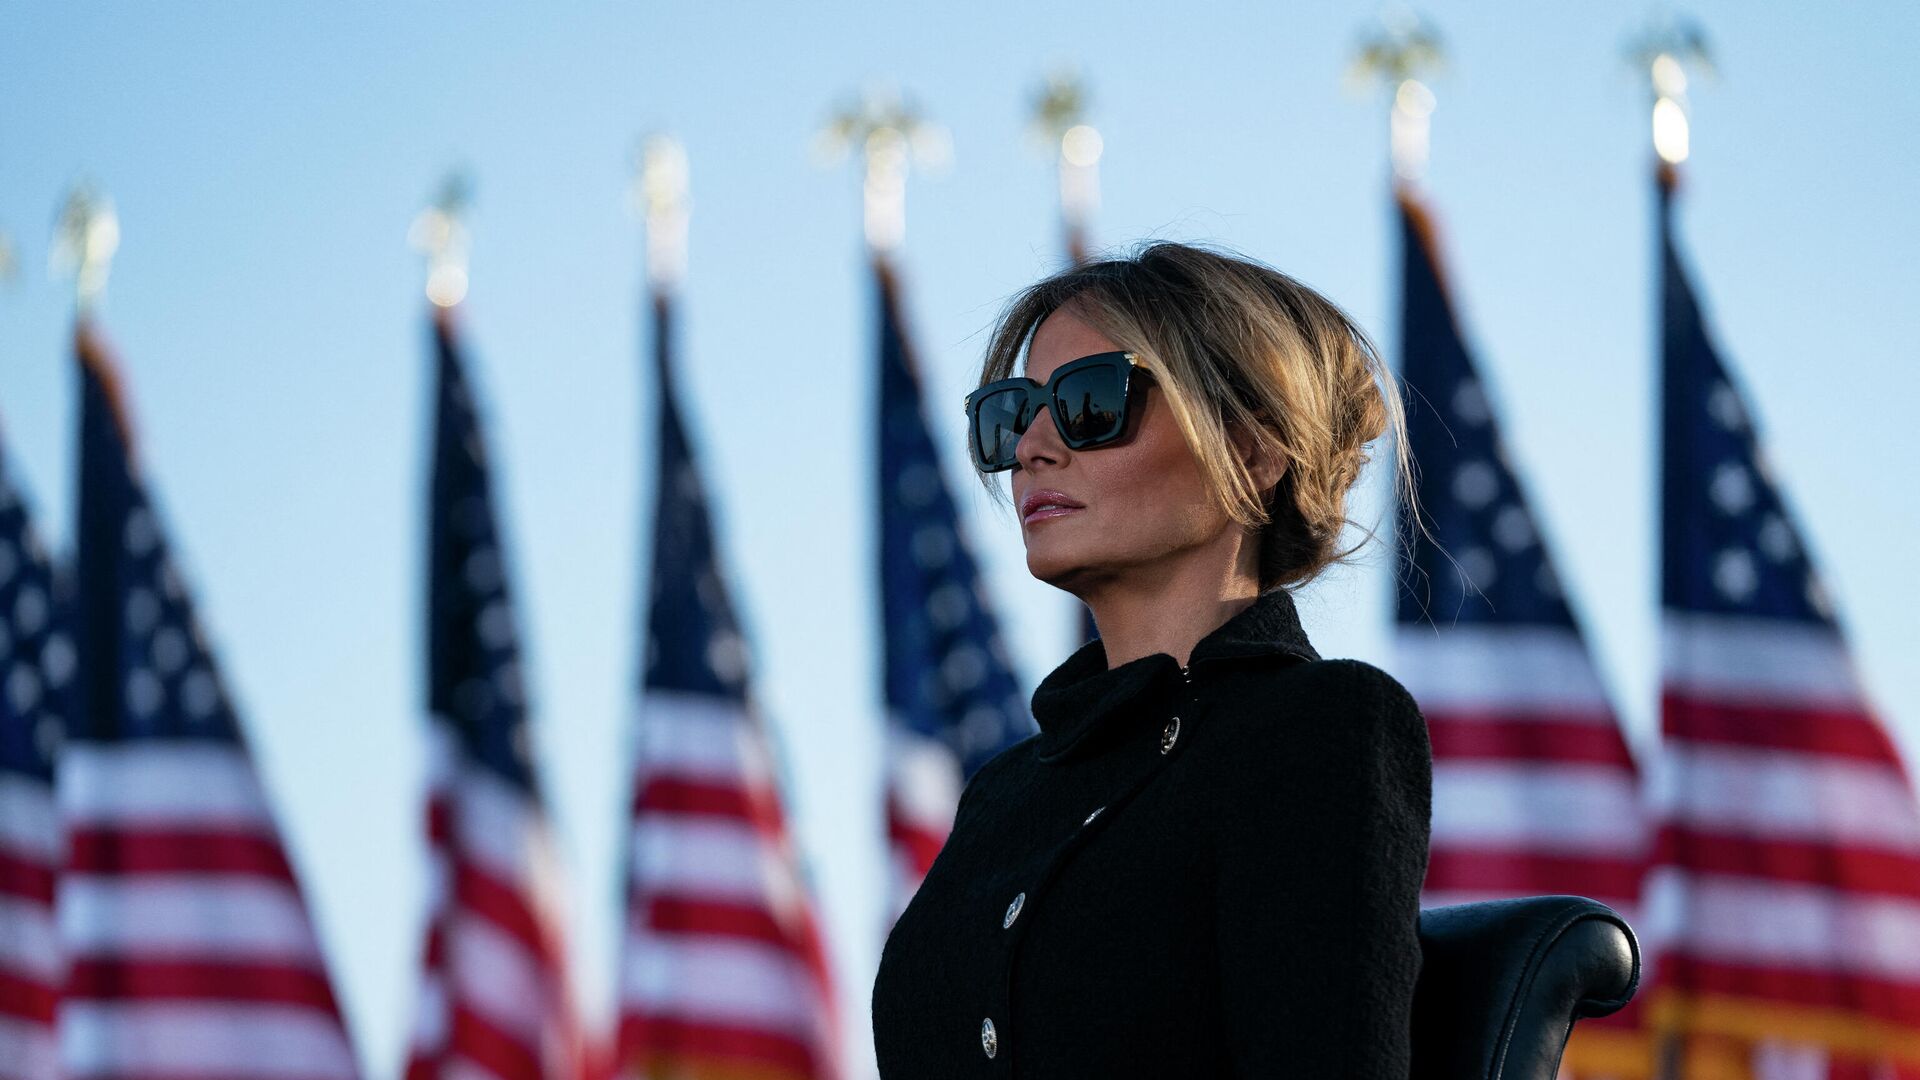 Melania Trump listens as her husband Outgoing US President Donald Trump addresses guests at Joint Base Andrews in Maryland on January 20, 2021 - Sputnik International, 1920, 13.09.2021